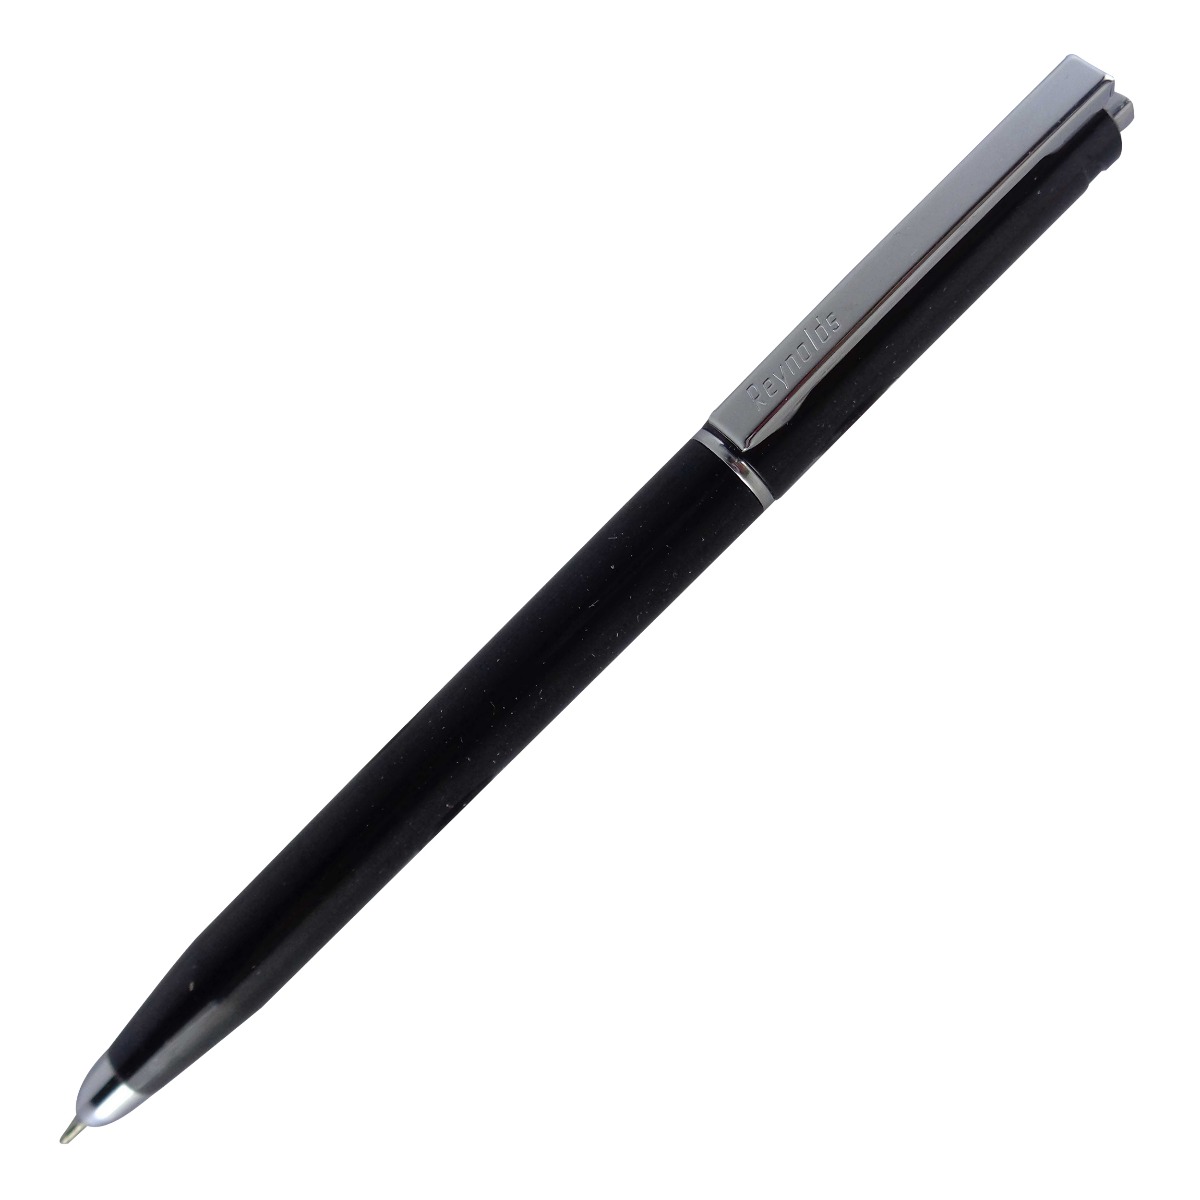 Reynolds Model: 15051 Jetter classic Black color body with silver clip fine tip retractable ball pen